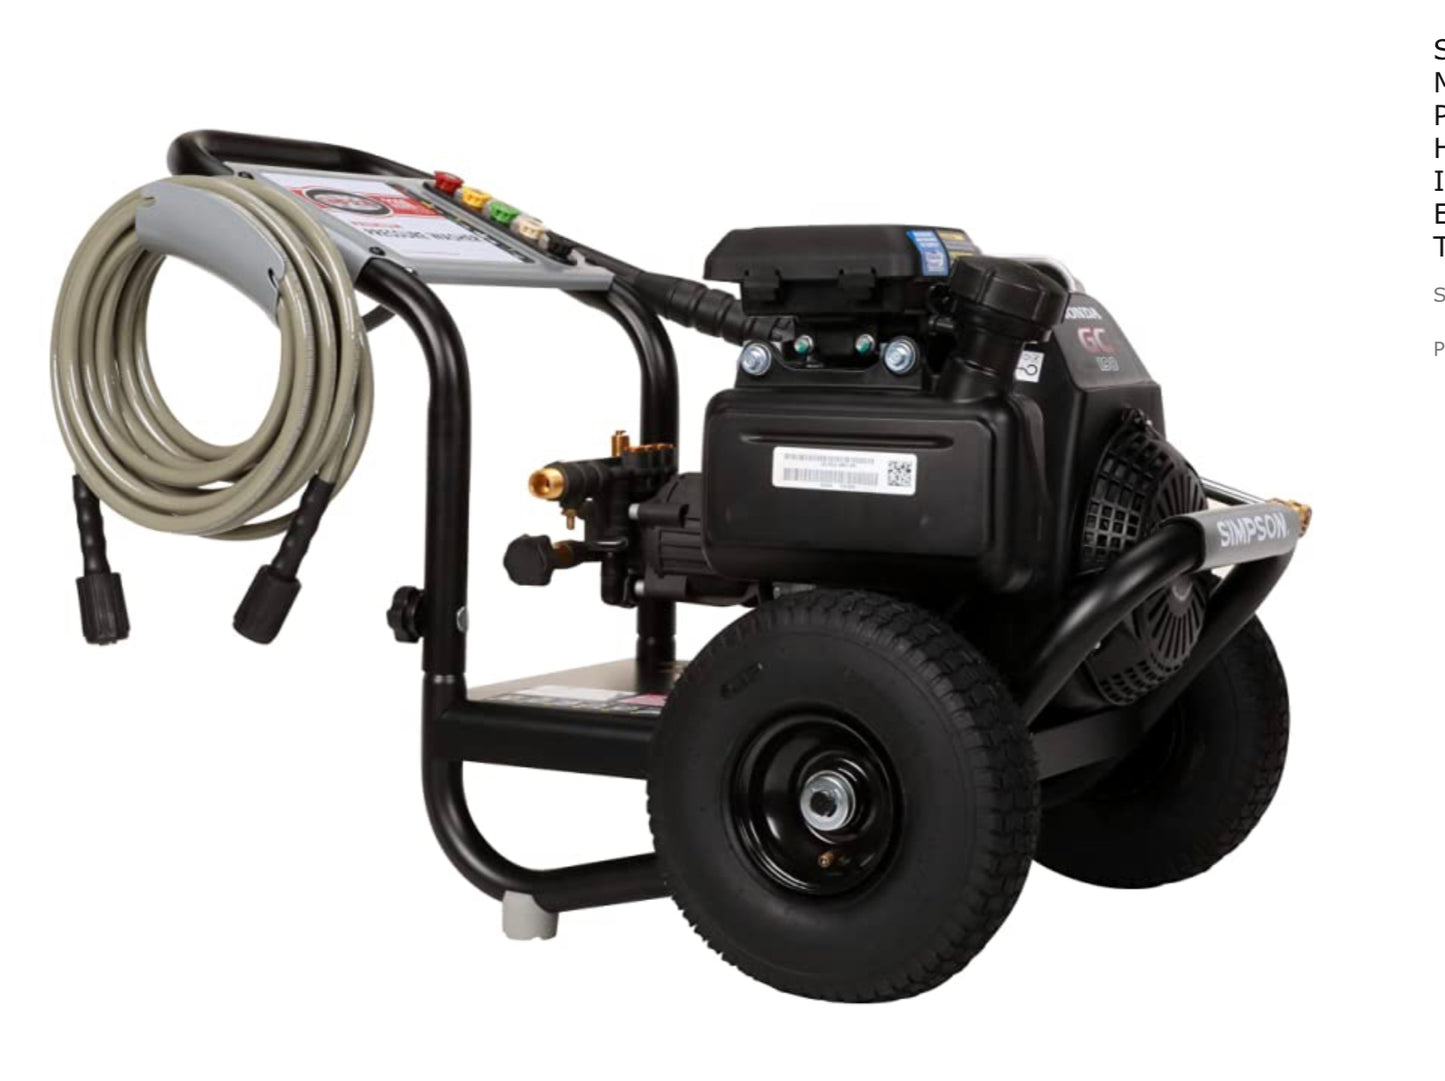 Honda Gas Pressure Washer, 2.5 GPM, Honda GC190 Engine, Includes Spray Gun and Extension Wand, 5 QC Nozzle Tips, 1/4-in. x 25-ft. MorFlex Hose